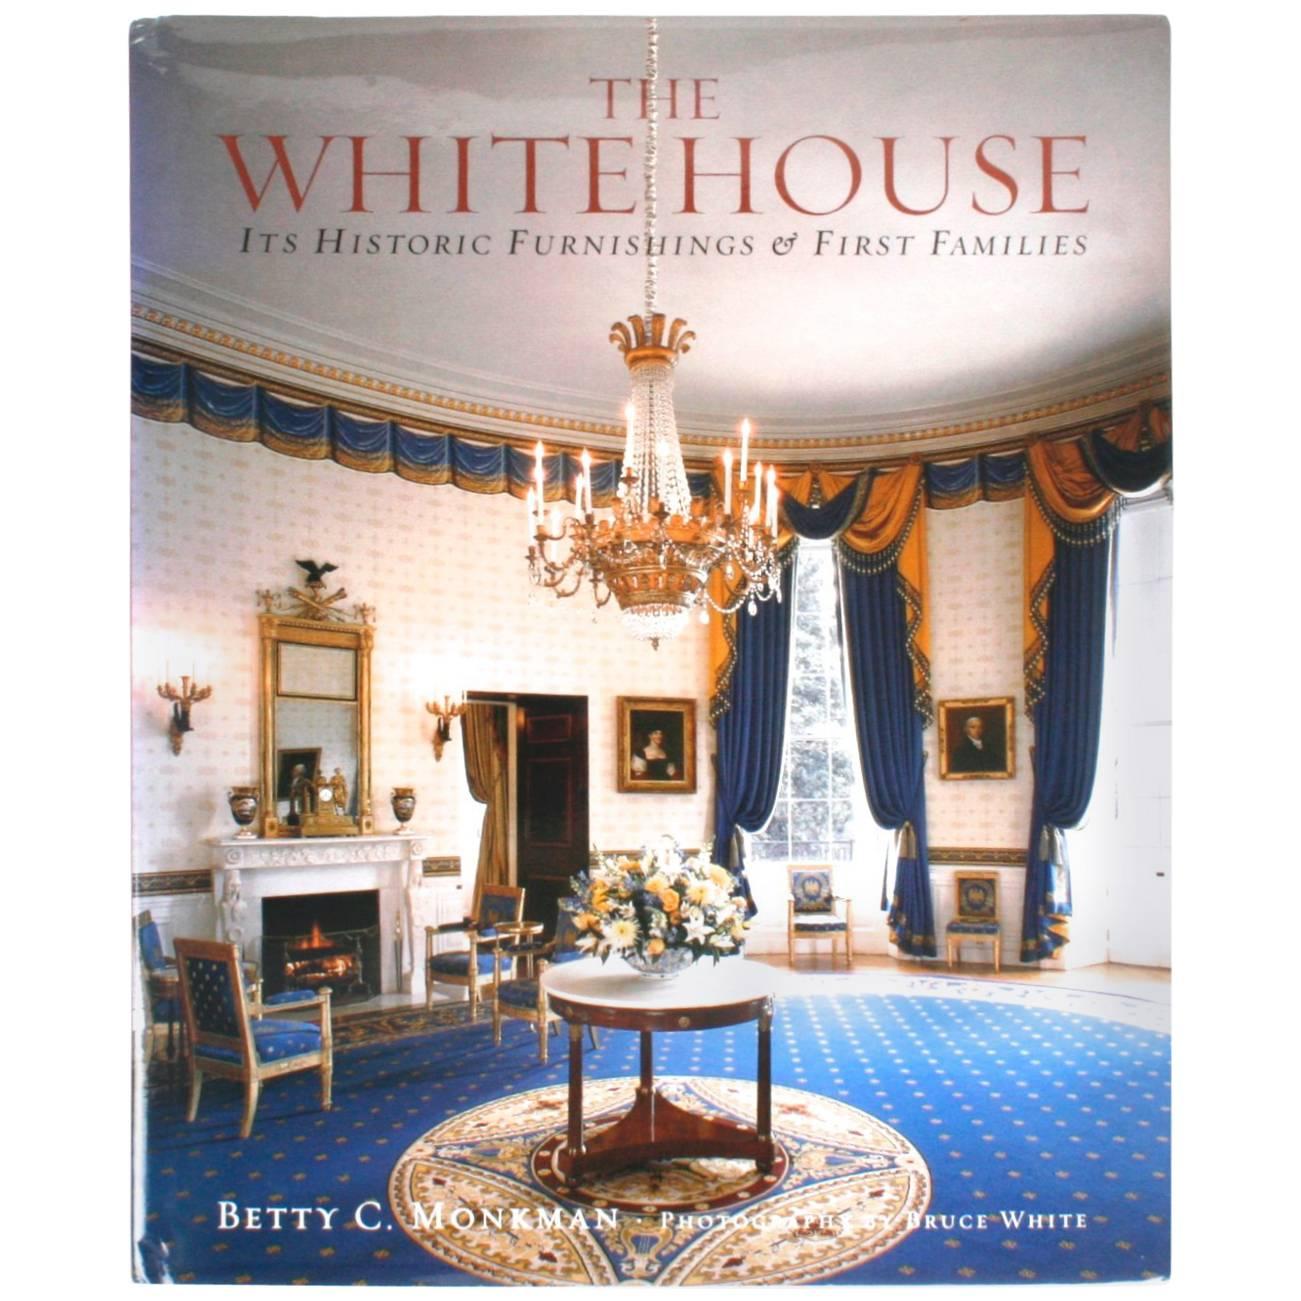 "The White House, It's Historic Furnishings & First Families" First Edition Book